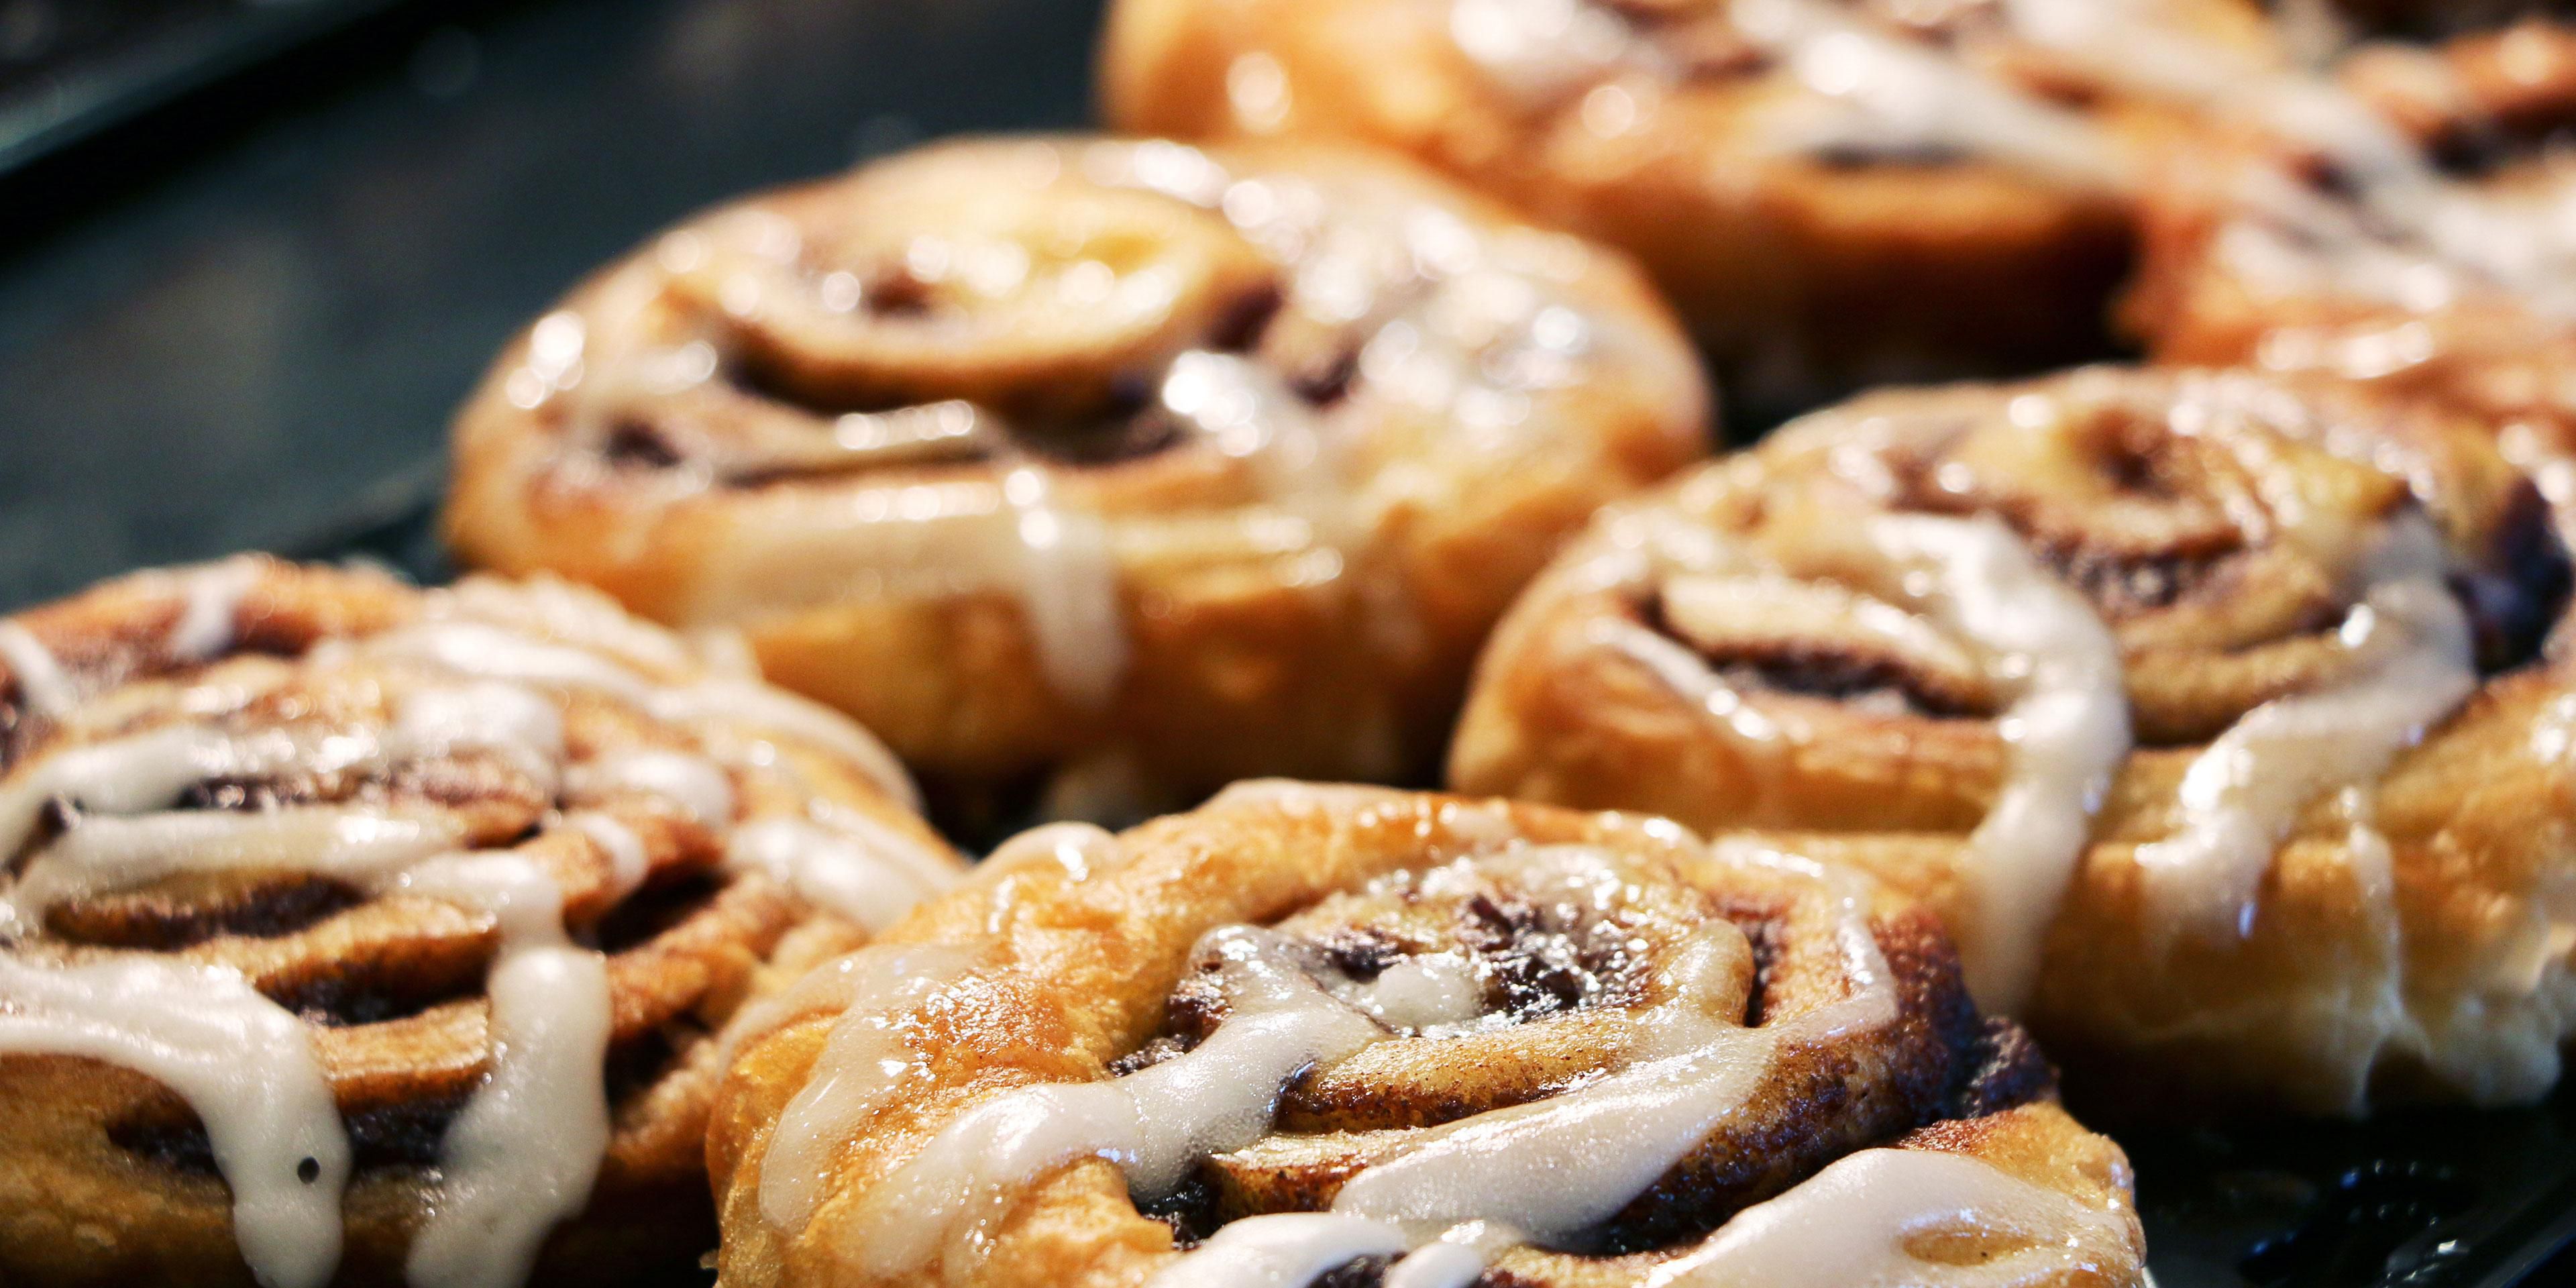 Check out our expanded hot breakfast buffet, now featuring Cinnabon cinnamon rolls!